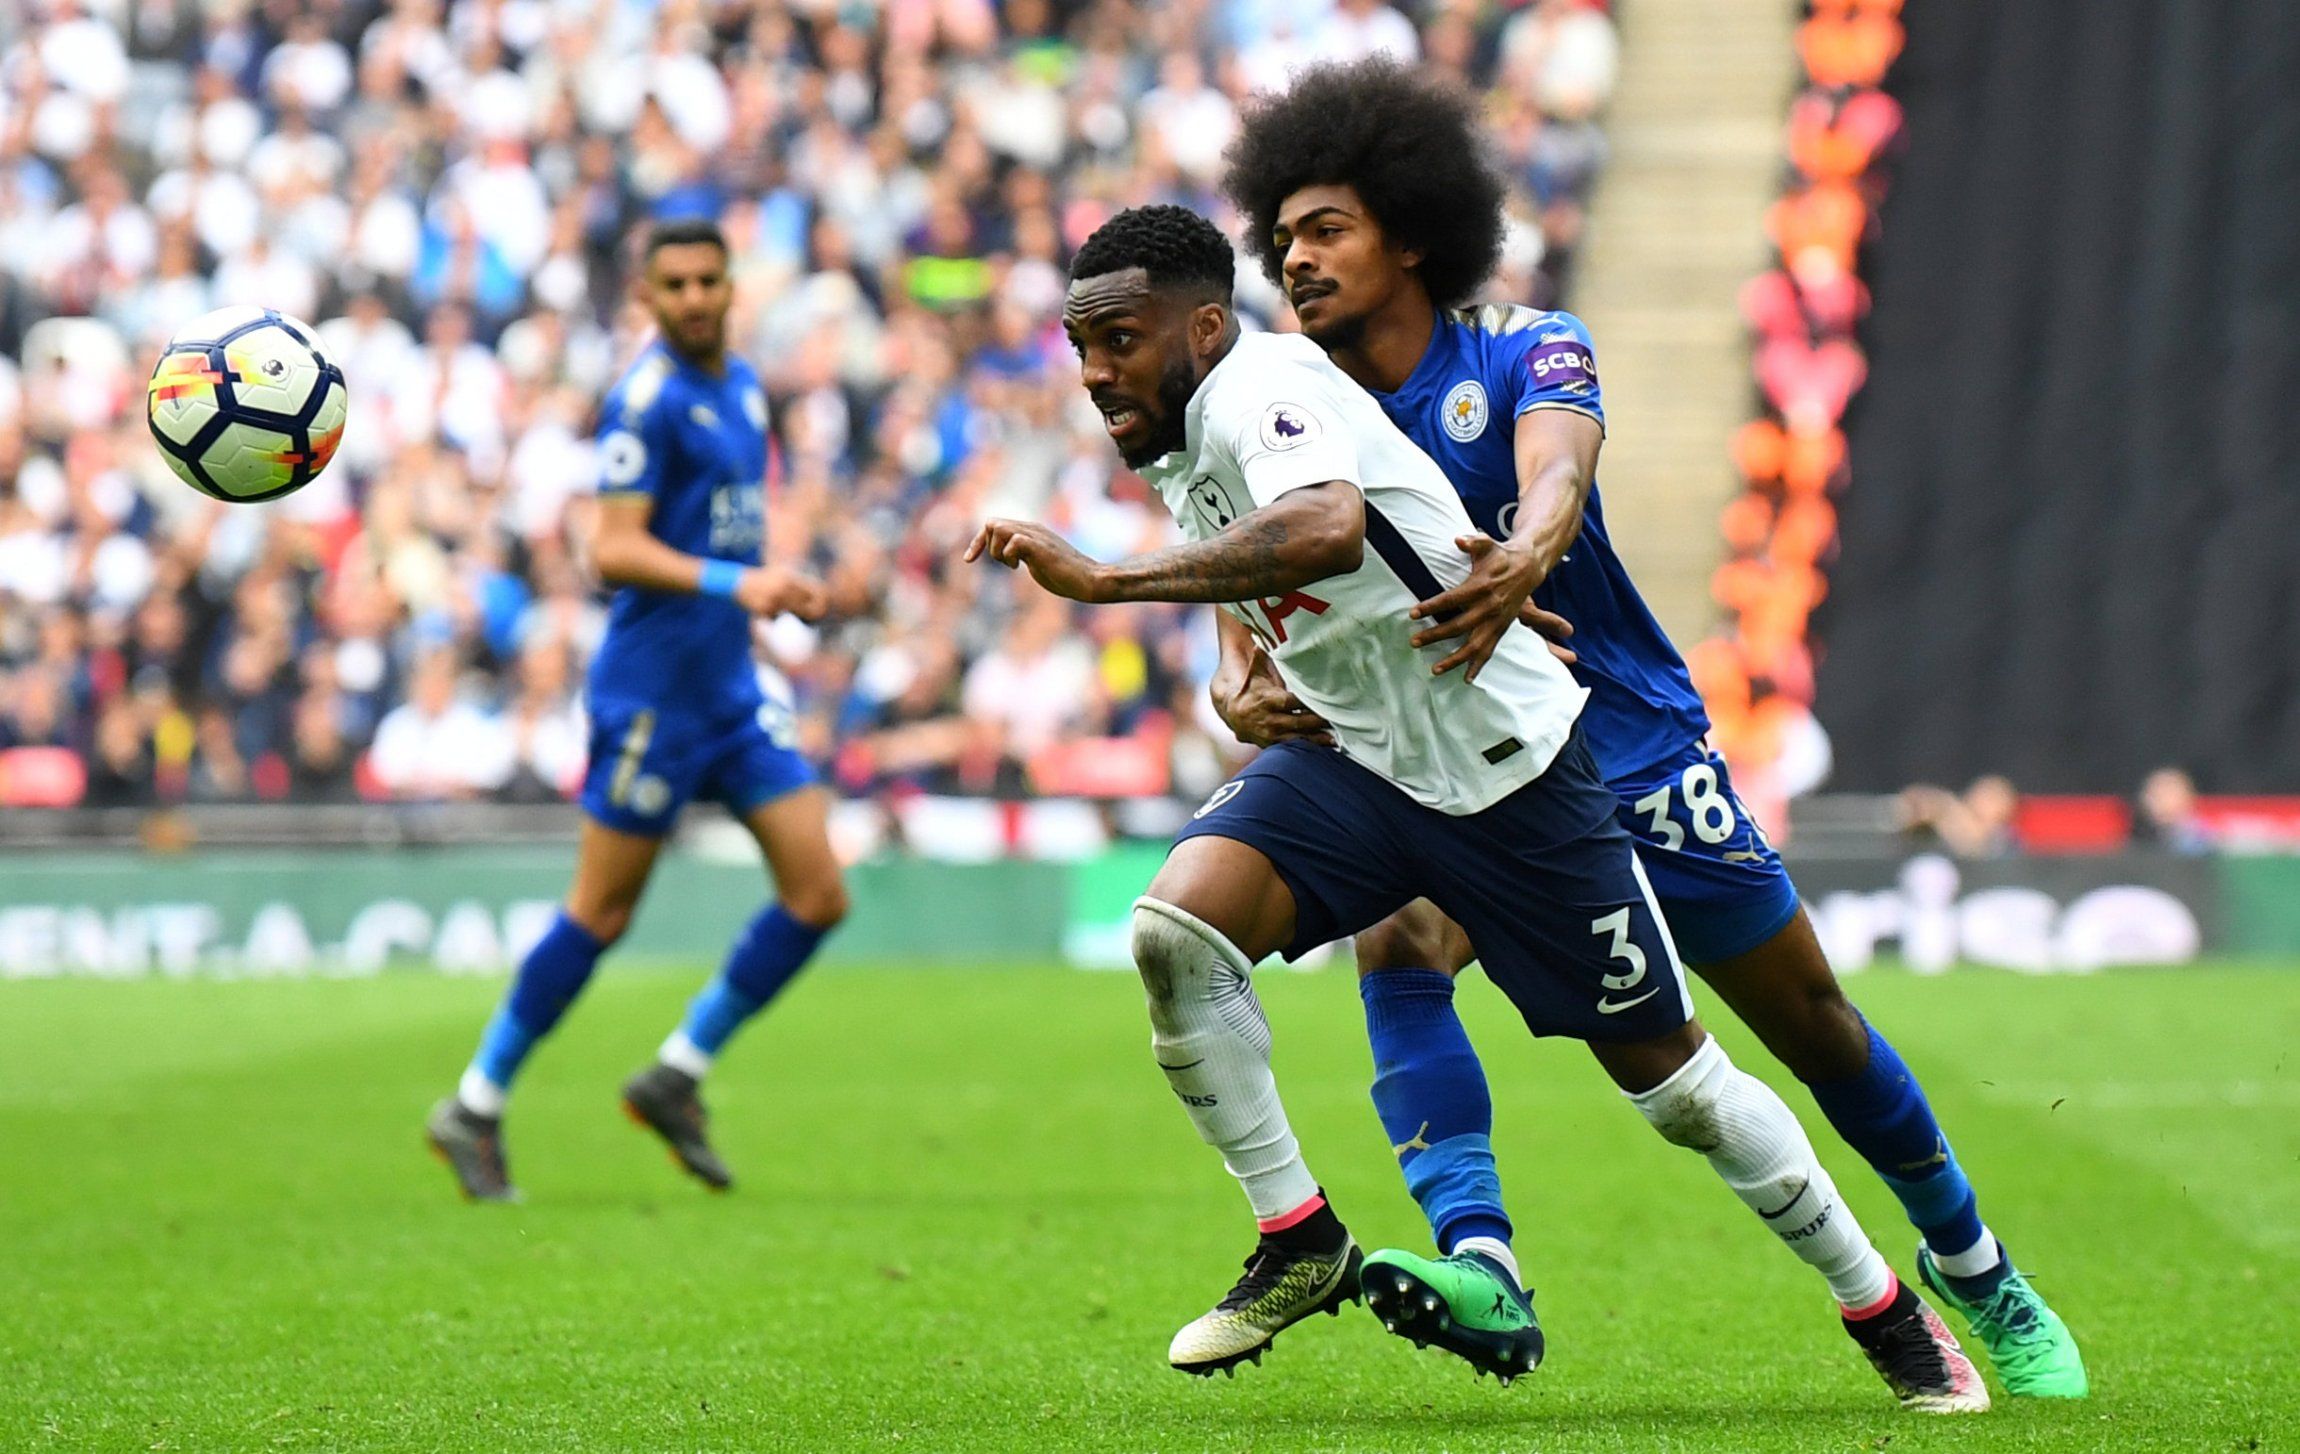 Danny Rose in action for Tottenham Hotspur